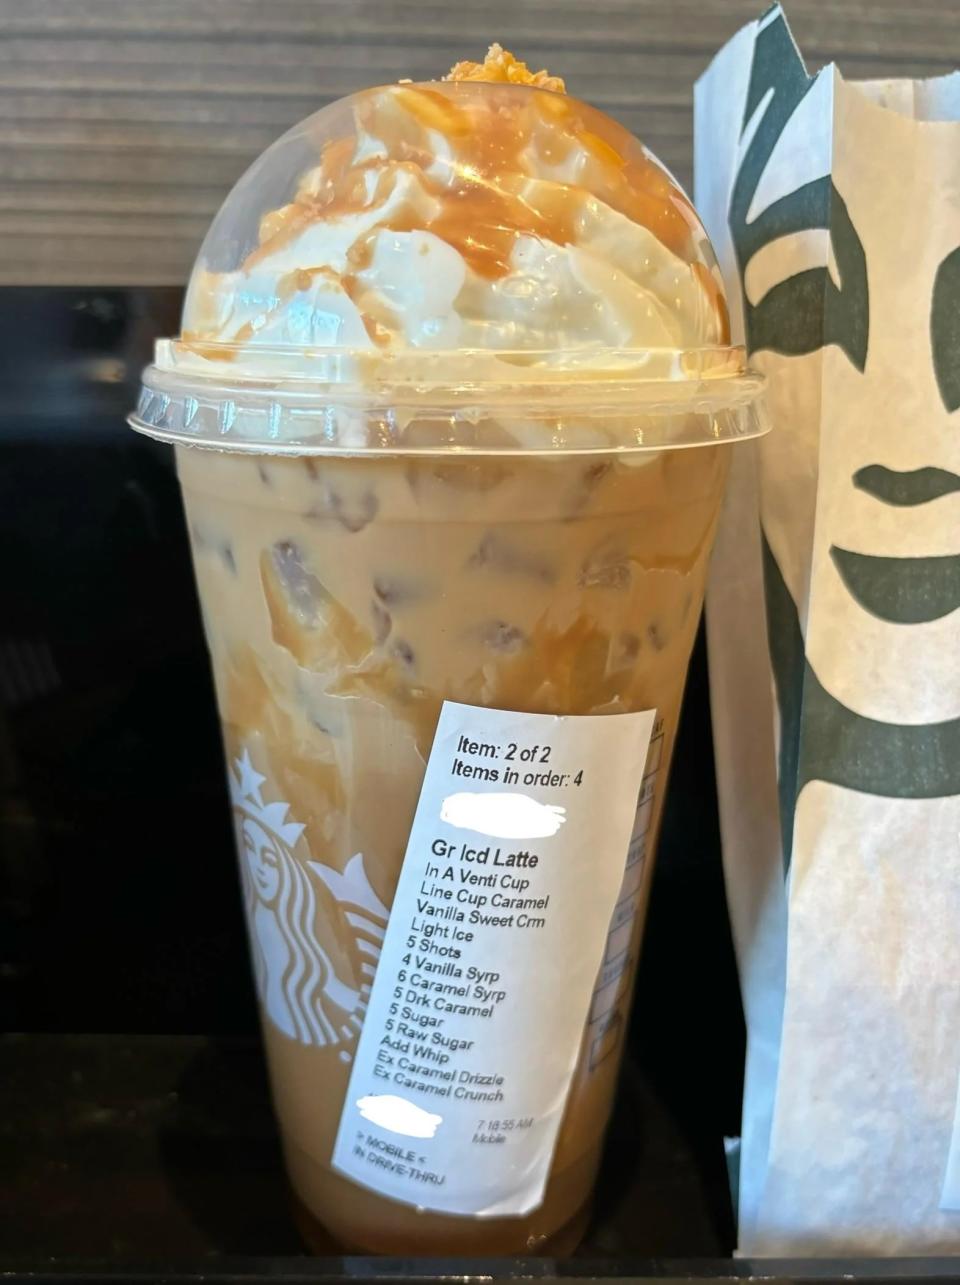 Iced latte with caramel drizzles in a clear cup, custom order sticker visible